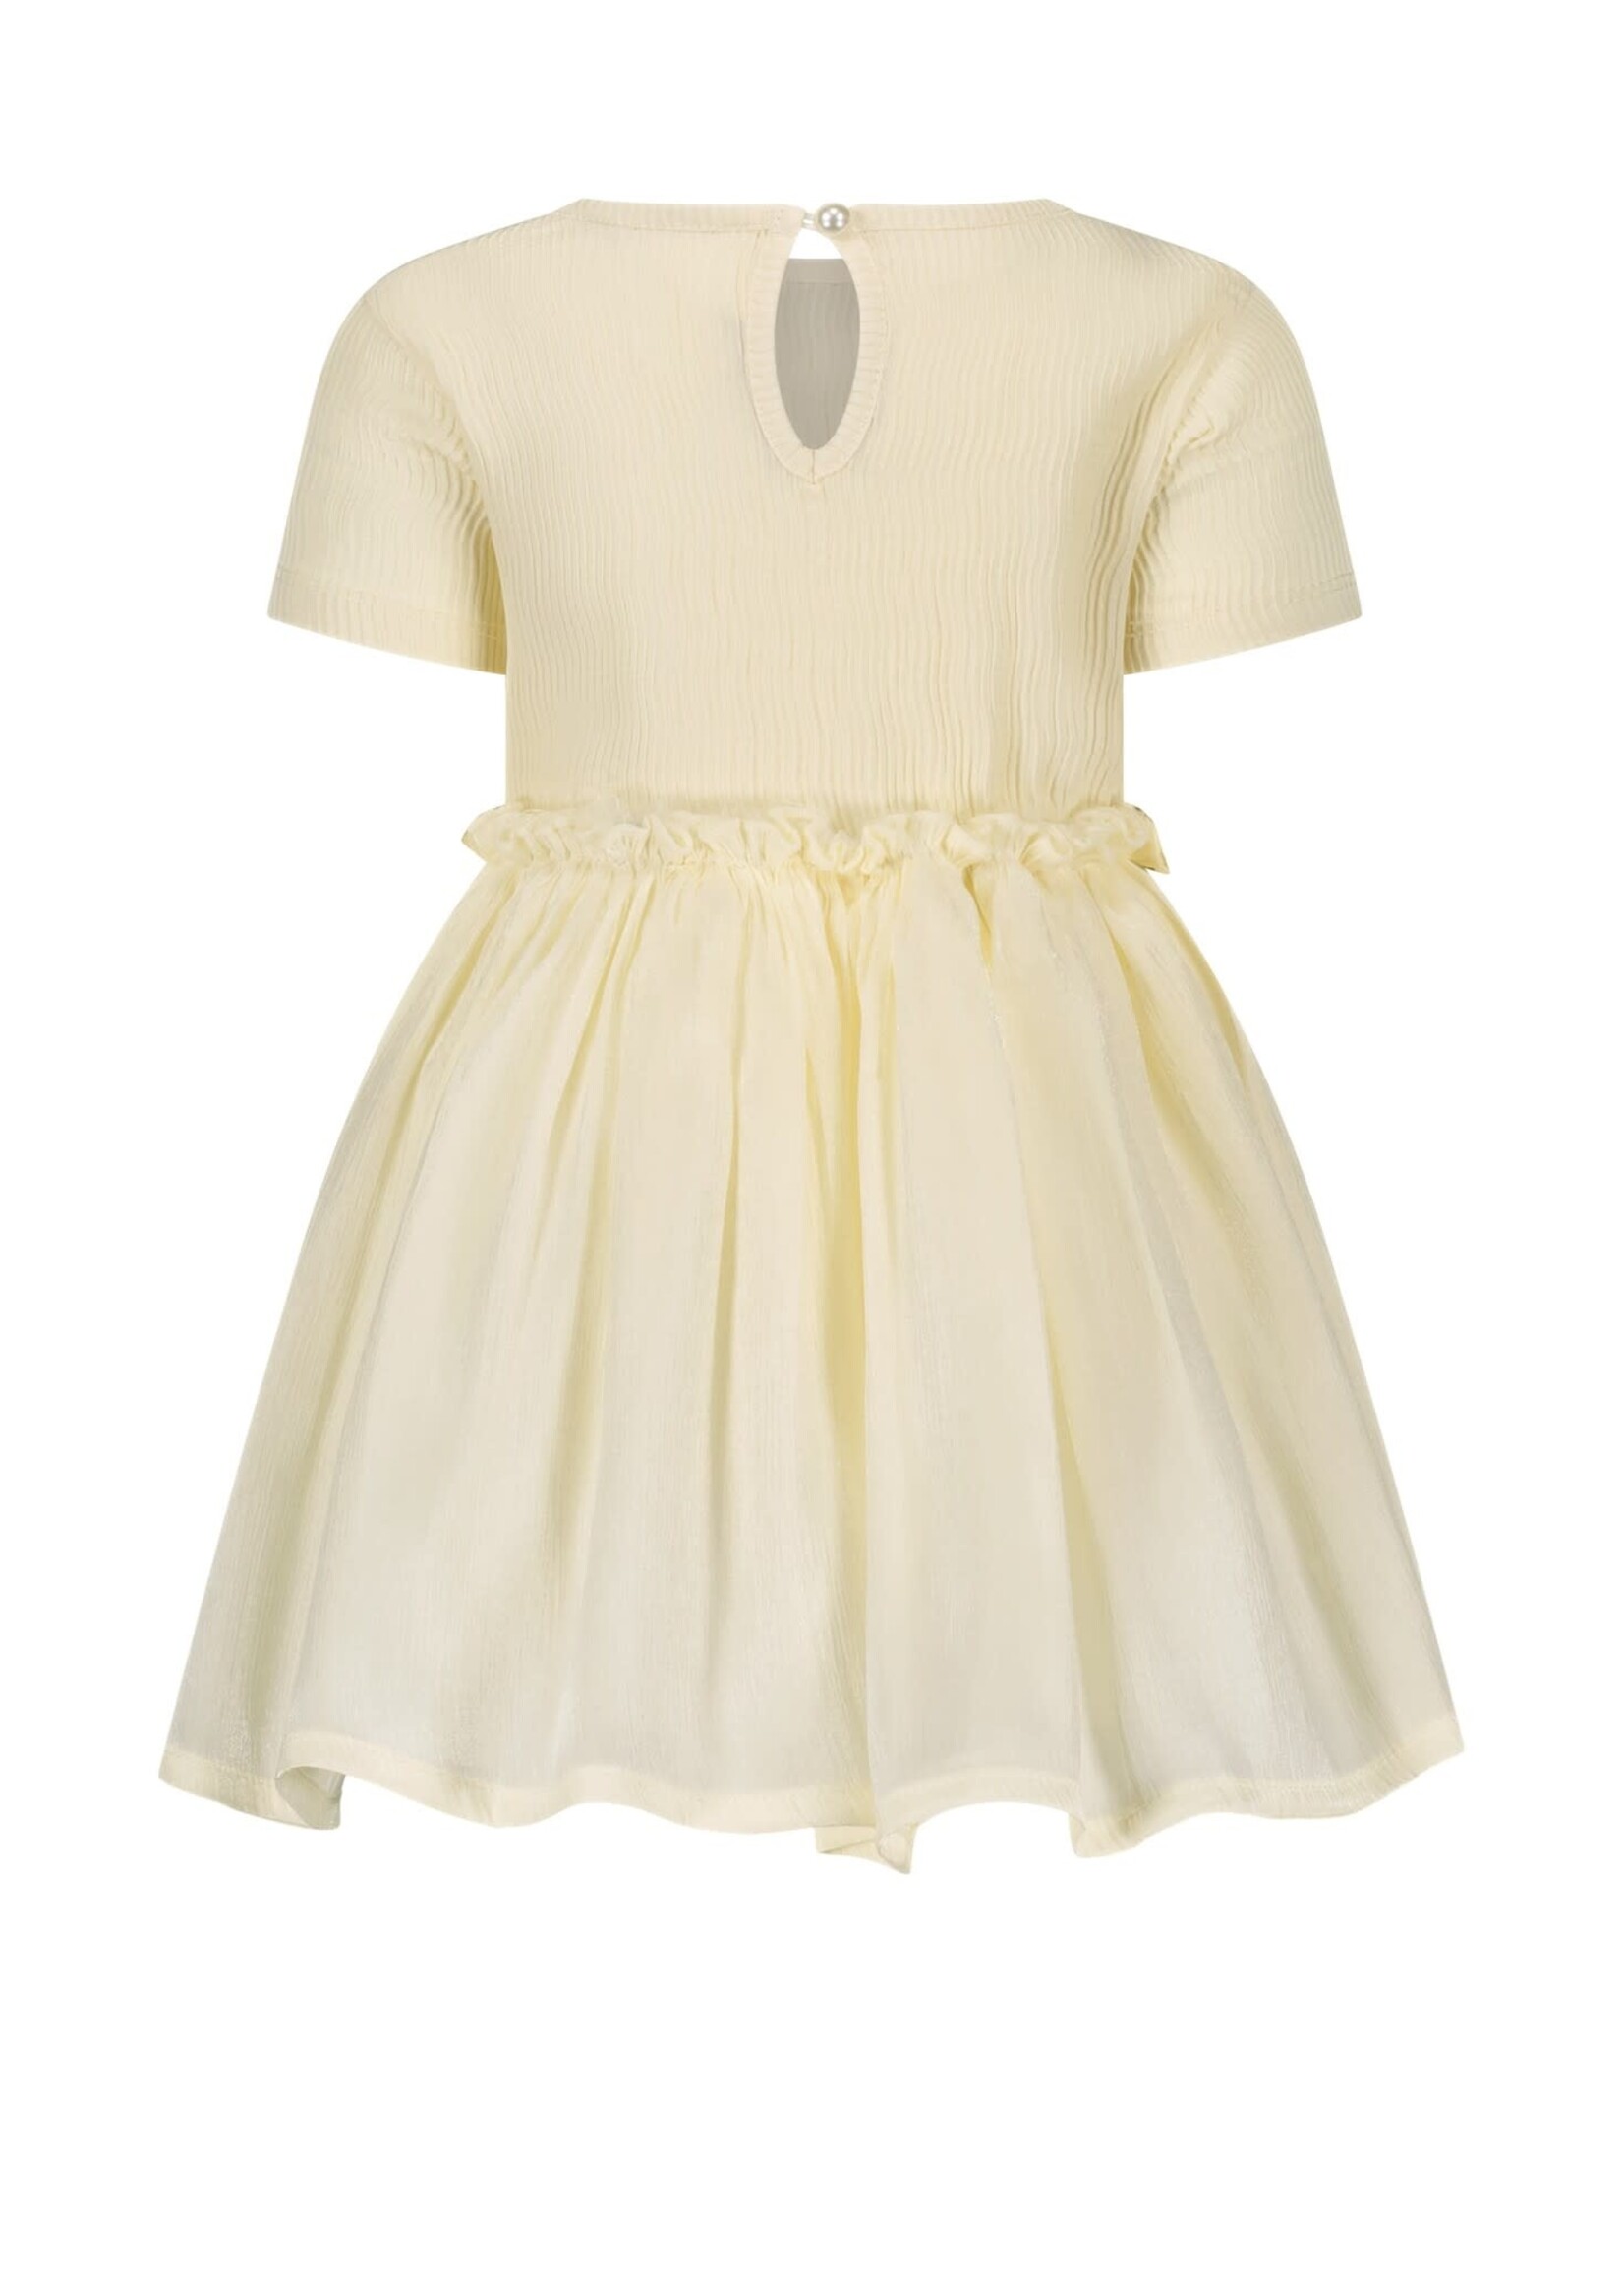 Le Chic Le Chic Dresses Smorry Off White